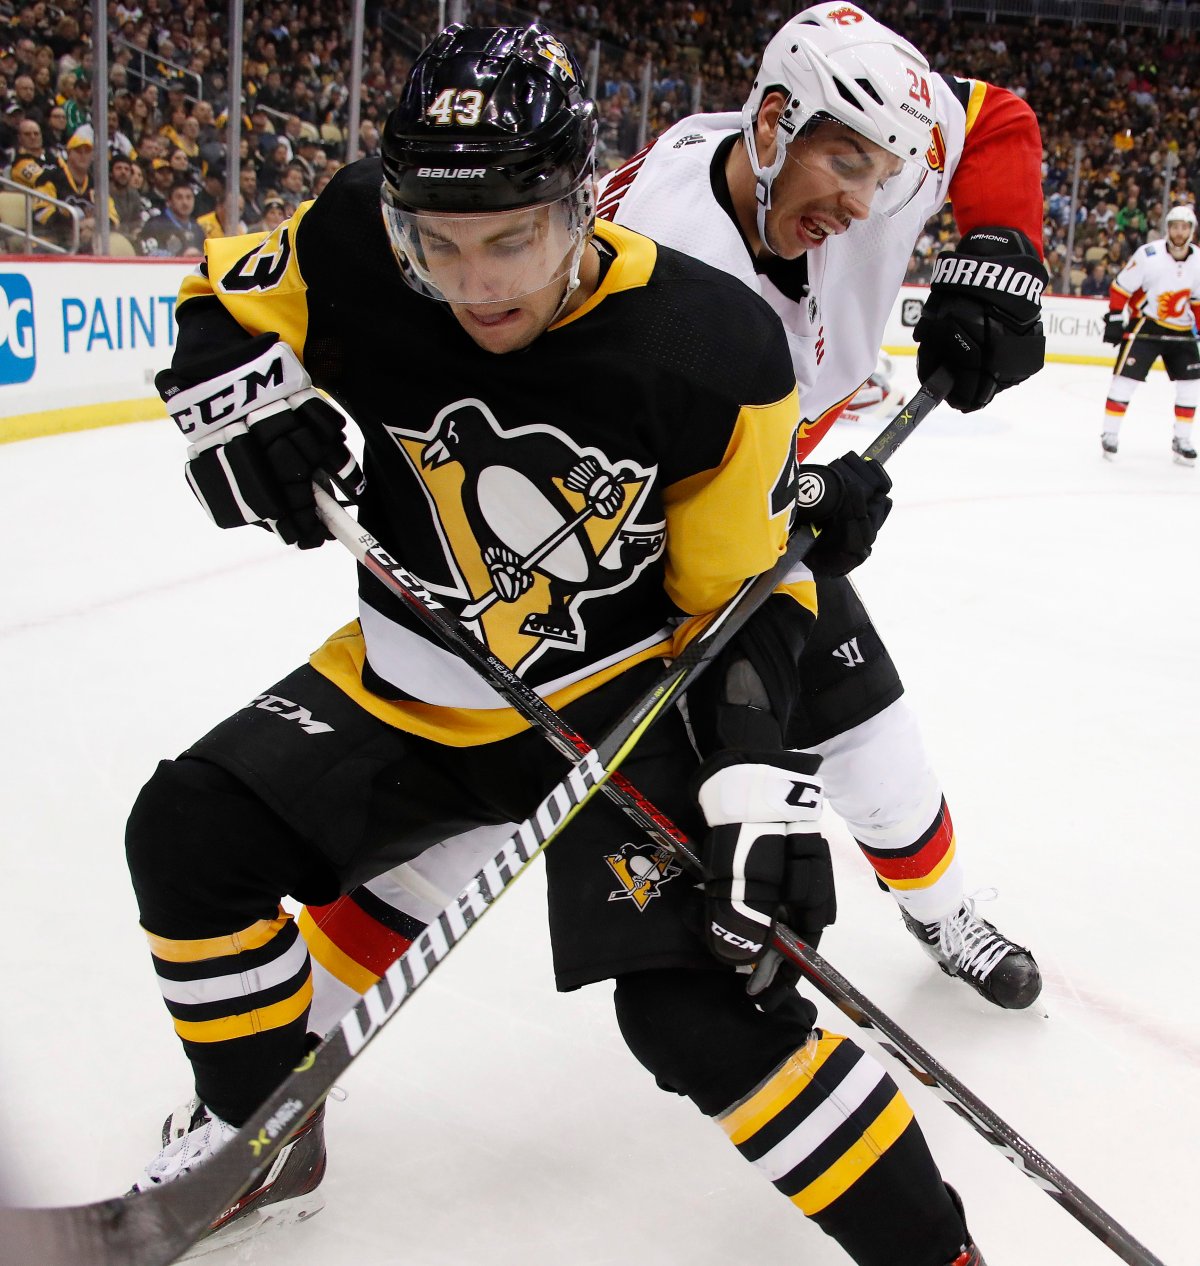 Calgary Flames' Travis Hamonic (24) battles Pittsburgh Penguins' Conor Sheary for the puck in the corner during the second period of an NHL hockey game in Pittsburgh, Monday, March 5, 2018. (AP Photo/Gene J. Puskar).